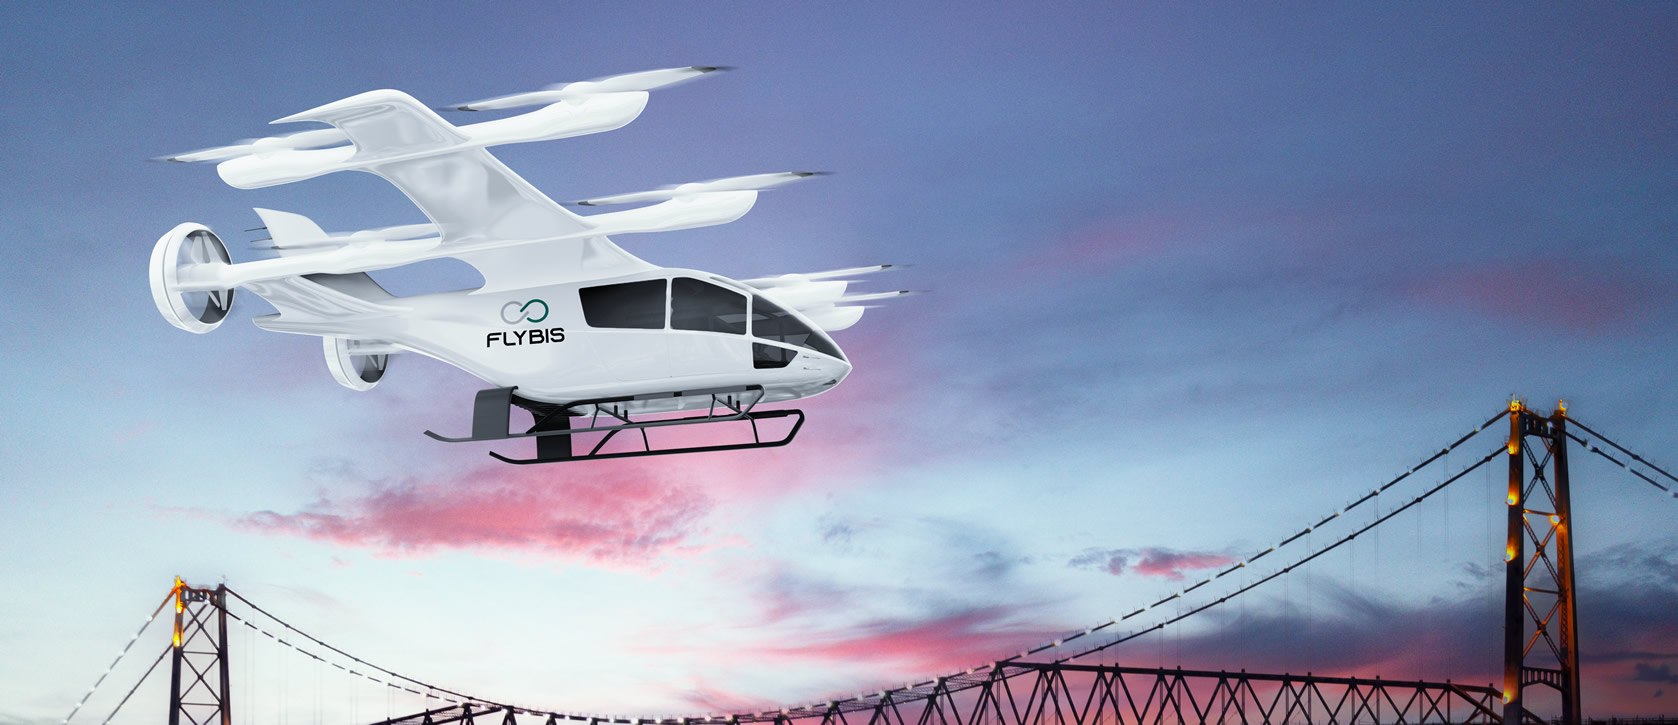 Eve and FlyBIS Announce Letter of Intent to Develop eVTOL Operations in Brazil and Latin America